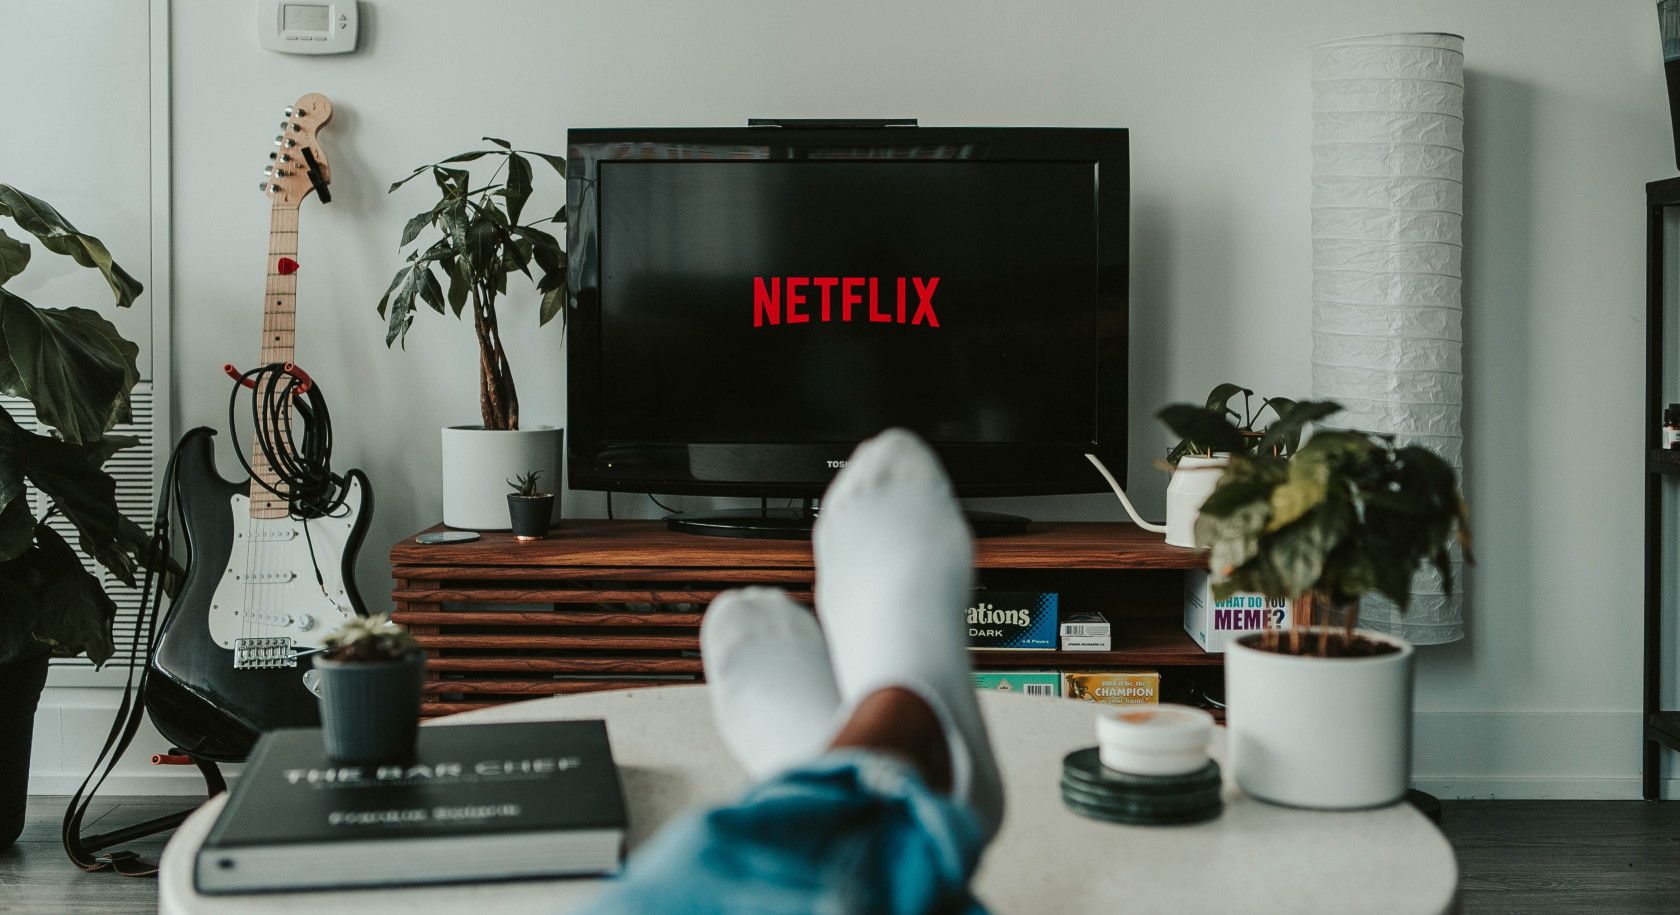 Man with feet on coffee table watching Netflix on TV